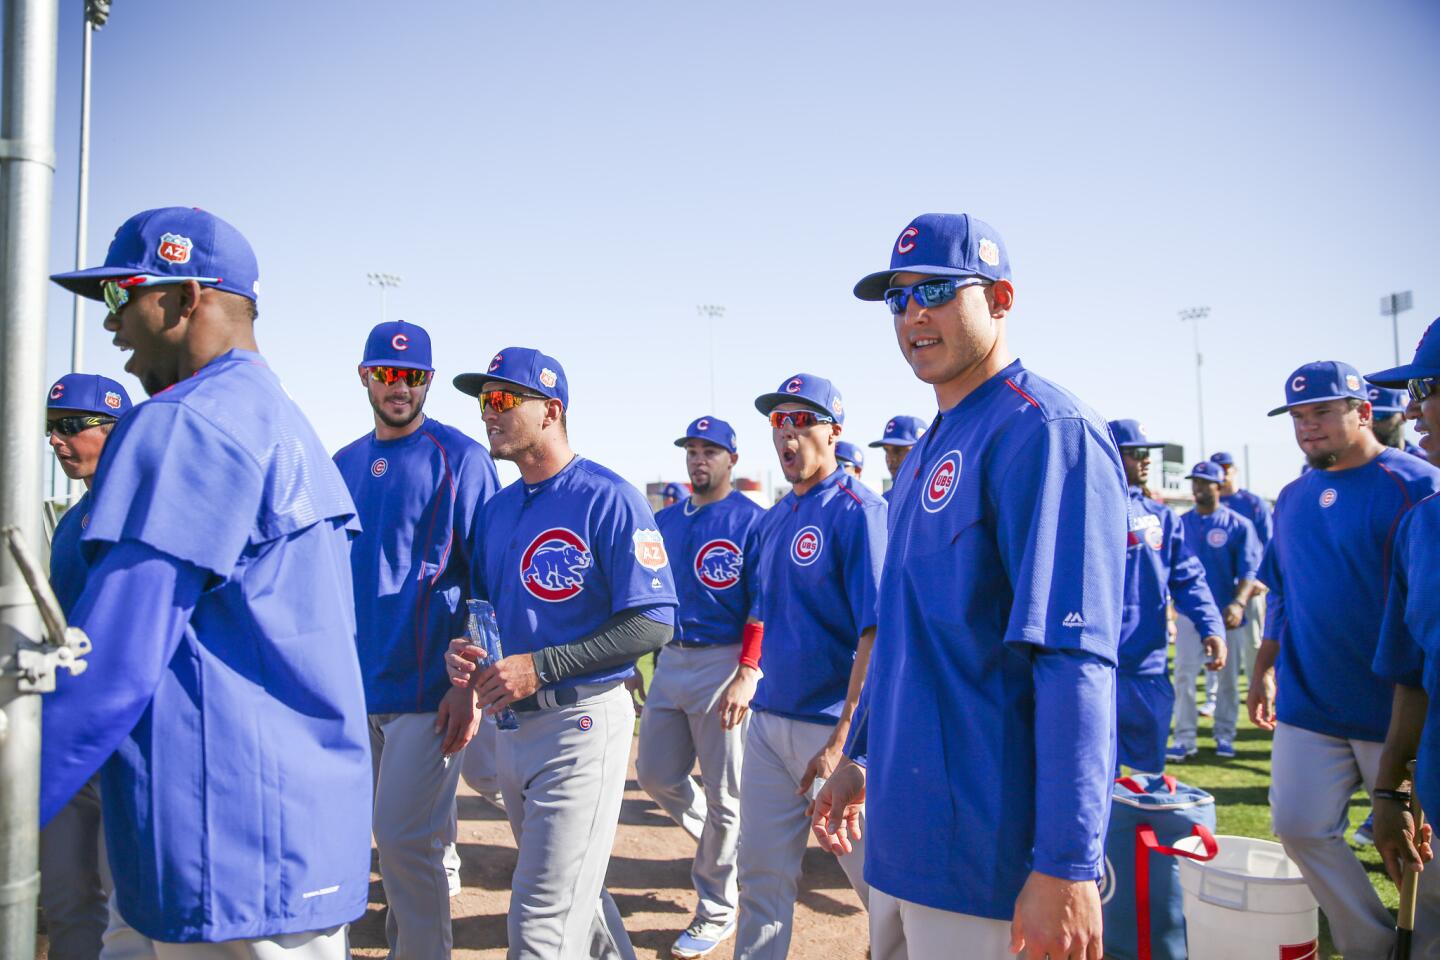 Cubs players walk of the field during spring training, Feb. 26, 2016.